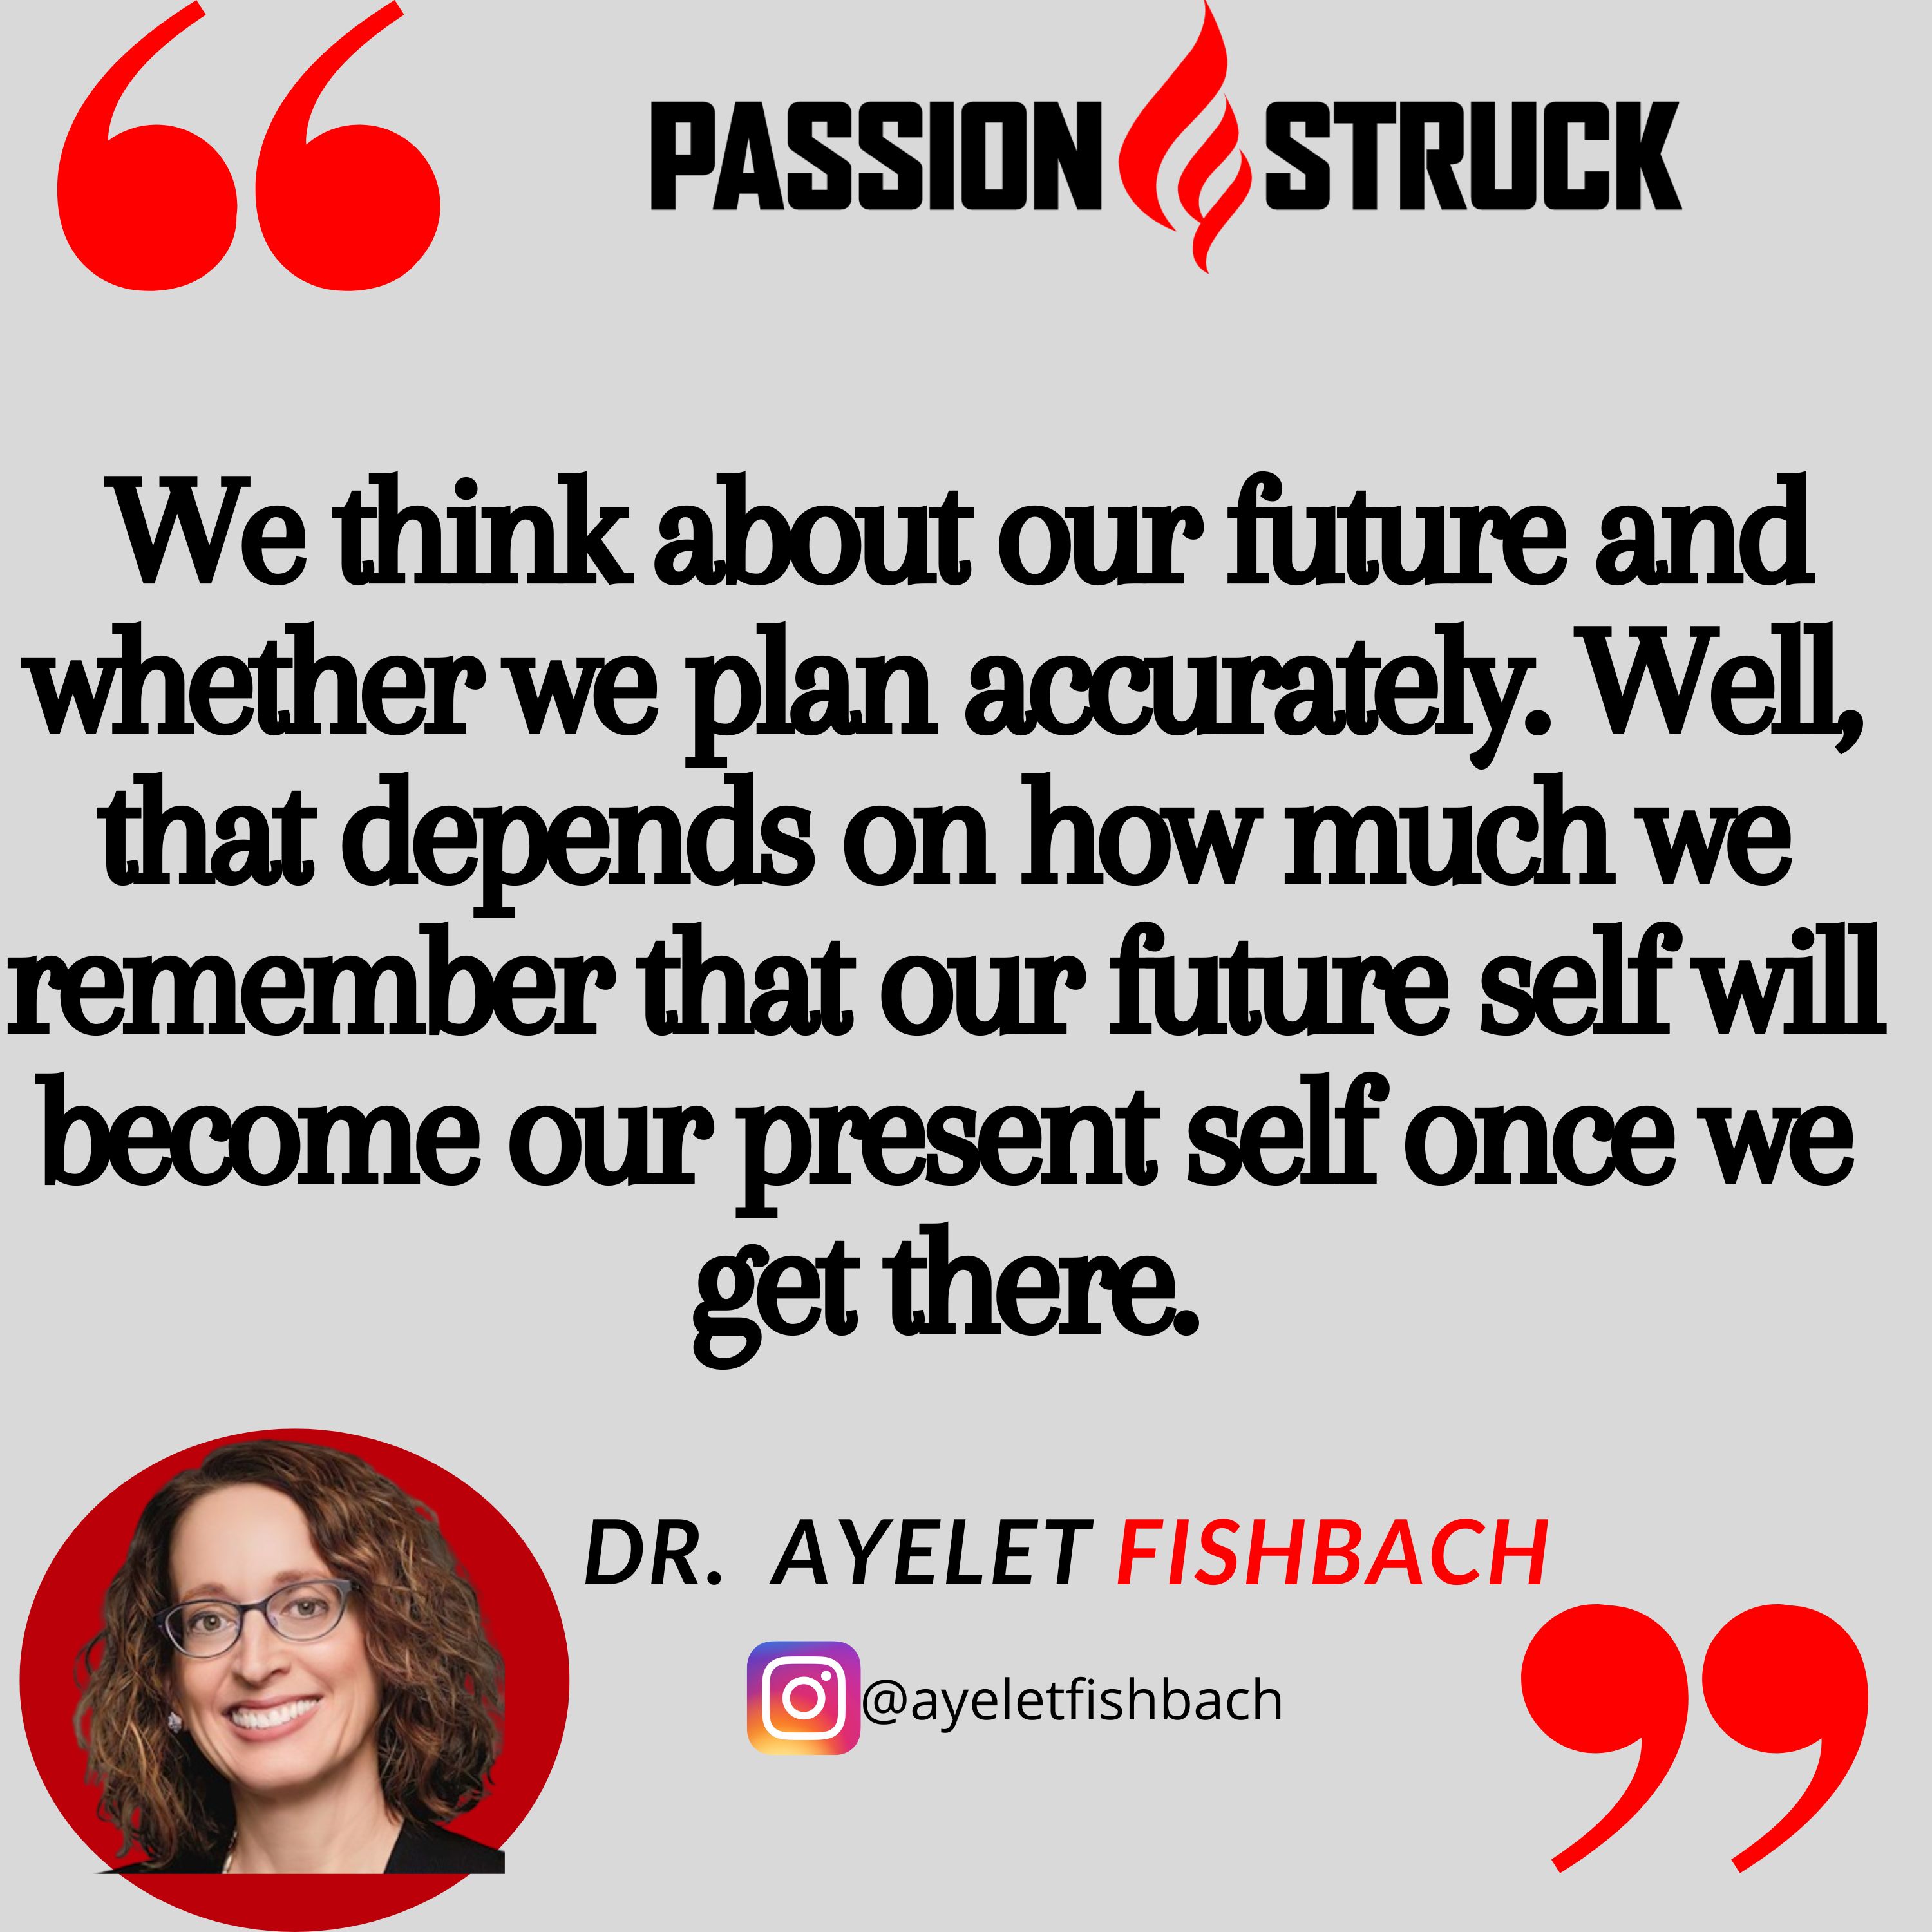 Dr. Ayelet Fishbach quote from the Passion Struck podcast: "We think about our future and whether we plan accurately. Well, that depends on how much we remember that our future self will become our present self once we get there."